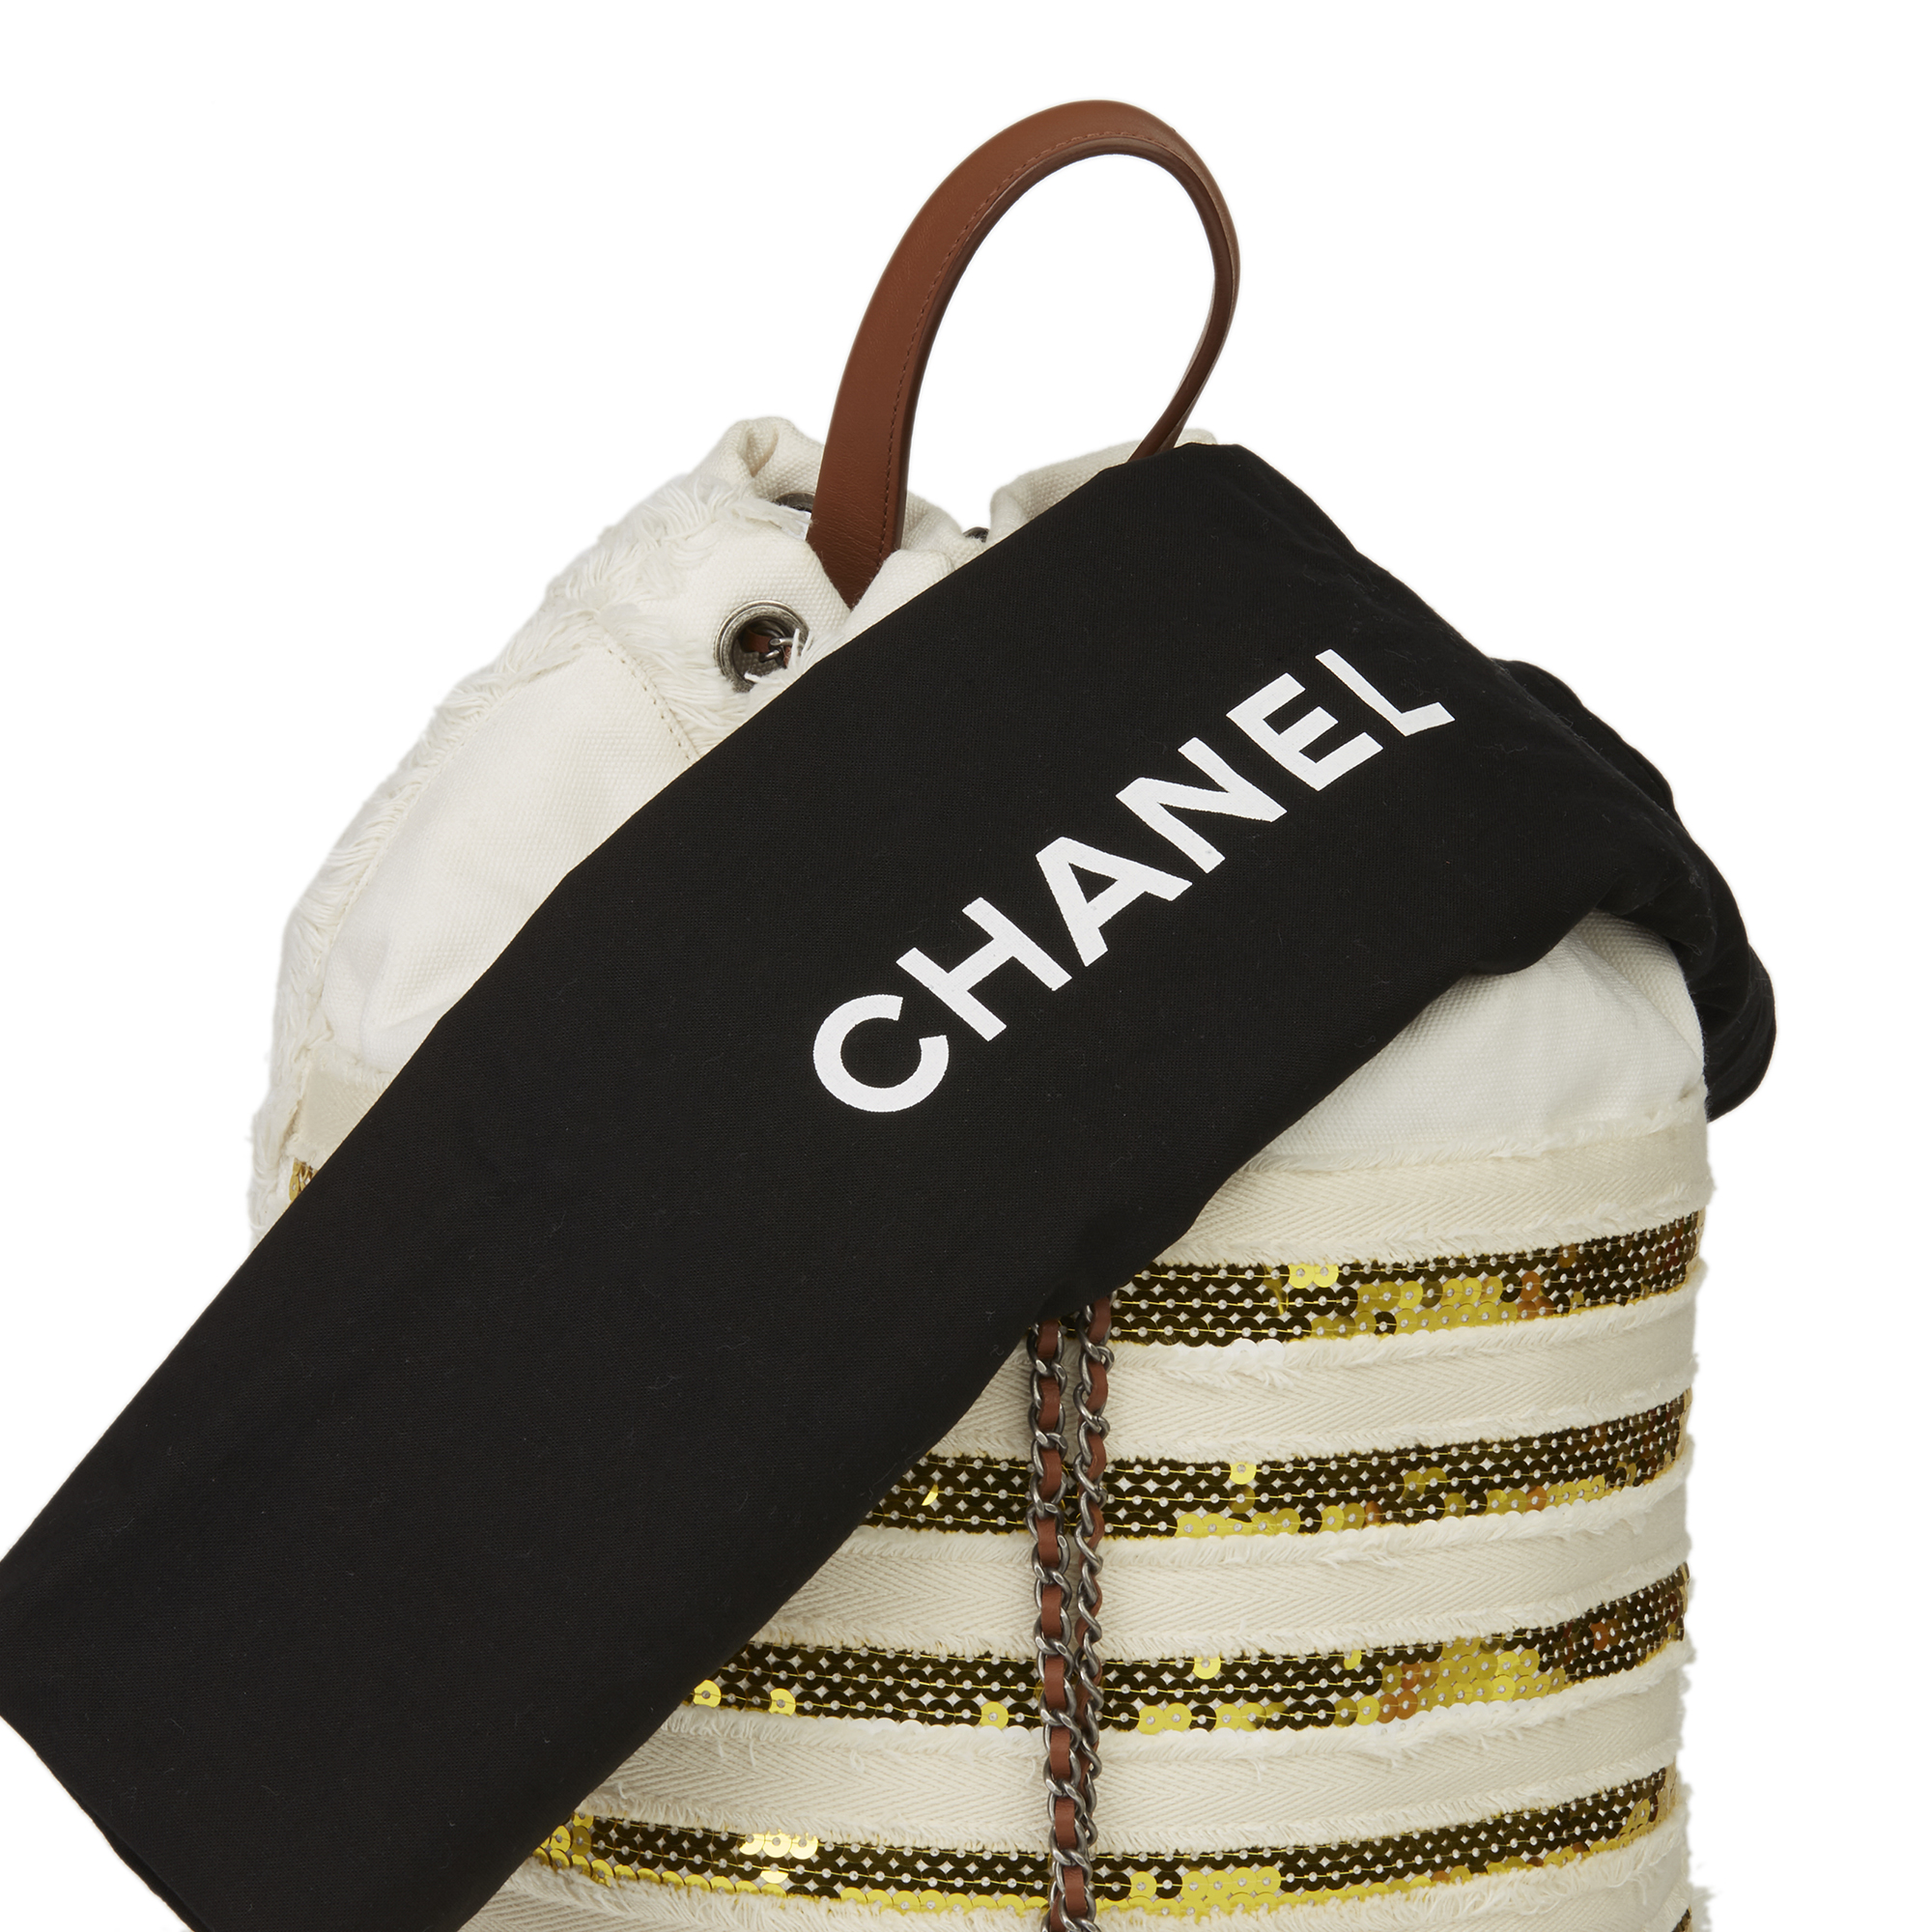 Chanel Cubano Trip Backpack - Image 3 of 11